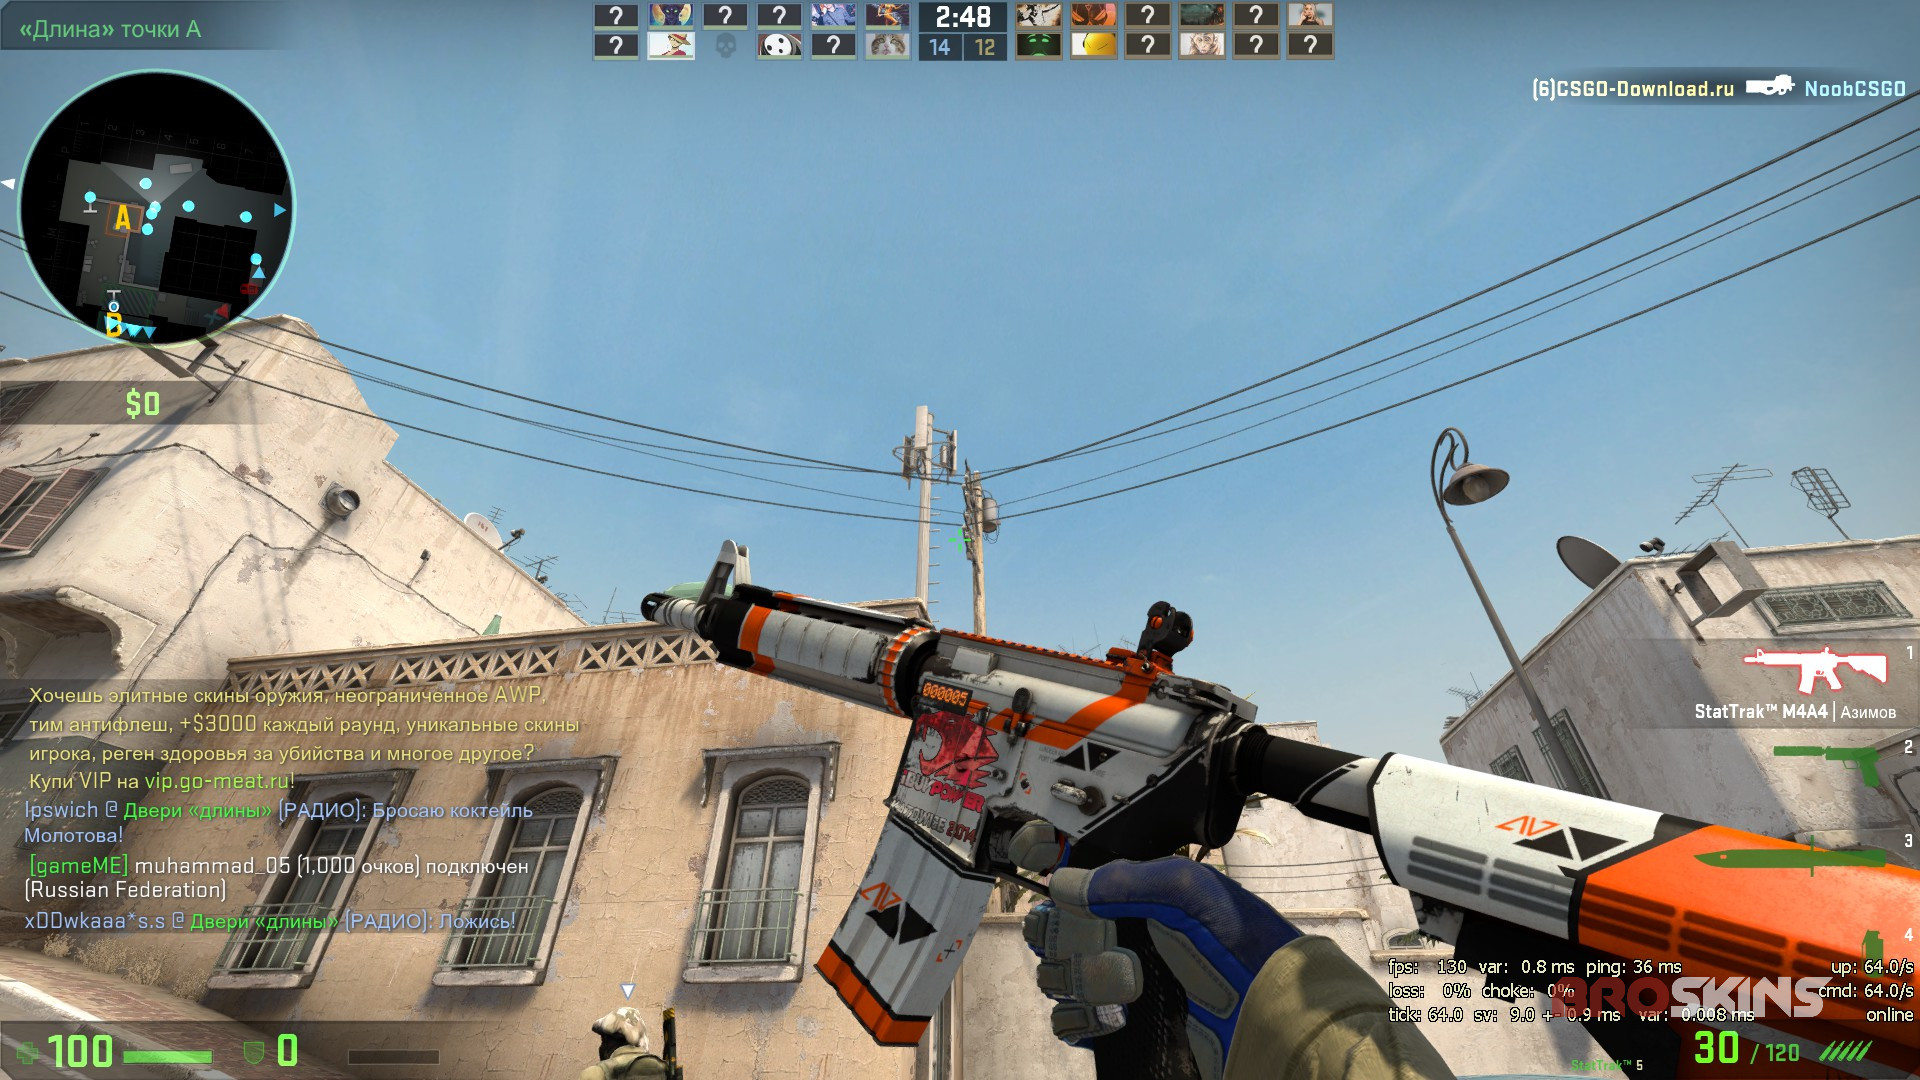 StatTrak™ M4A4  Asiimov with iBUYPOWER (Holo) Katowice 2014 and Specialist Gloves Mogul